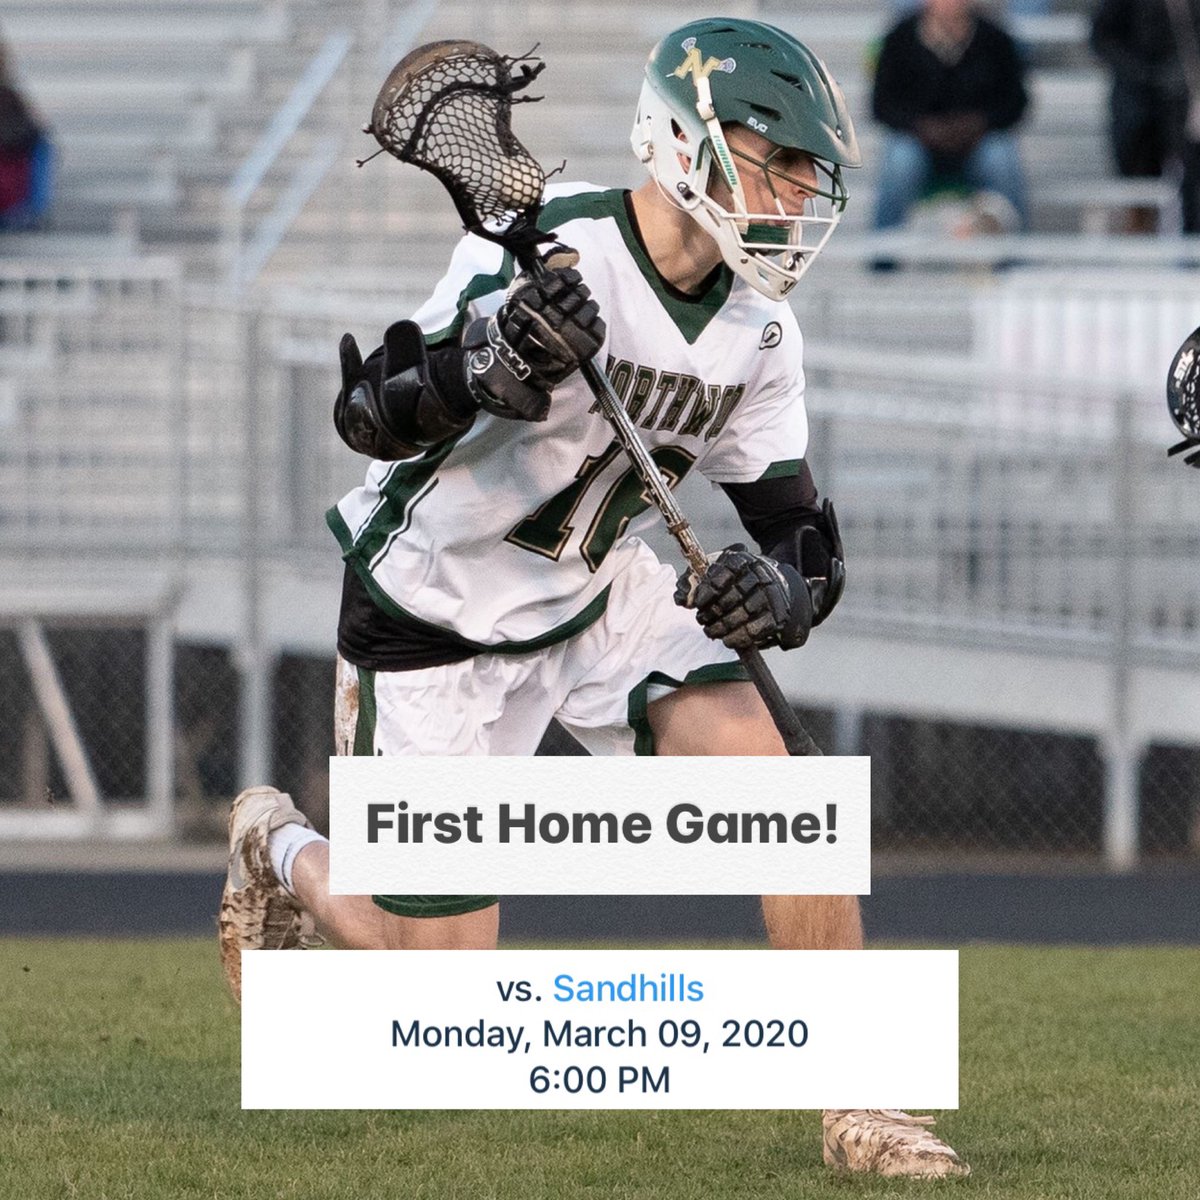 Support your Chargers tonight!! Men’s lax has their first varsity home game lacrosse 🥍 🐎🥍 #menshighschoollacrosse #highschoollax #hslax #northwoodlax #northwoodhighschoollacross #nhslax